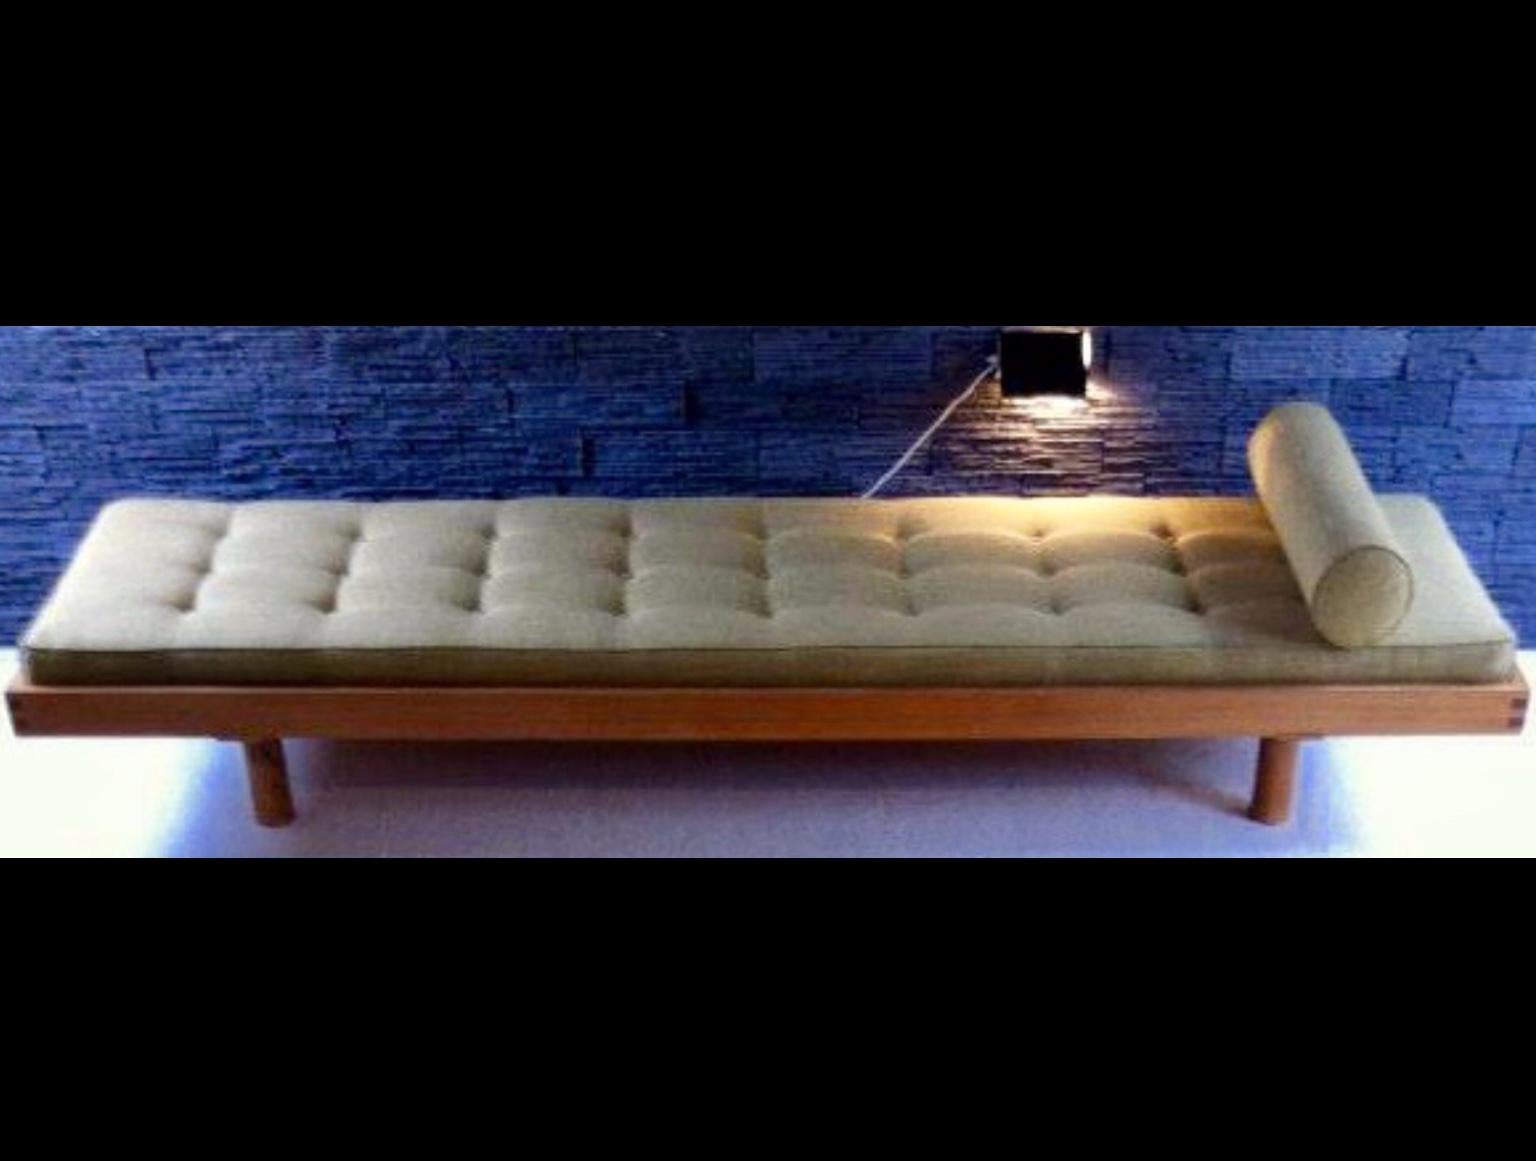 Very large daybed L 09 H from Pierre Chapo 1970 in French elm. Very elegant bench this component of a padded mattress in perfect condition renovated with a pistachio colored canvas and a cylinder headrest. The dimensions are 2.49 m long and 76 cm